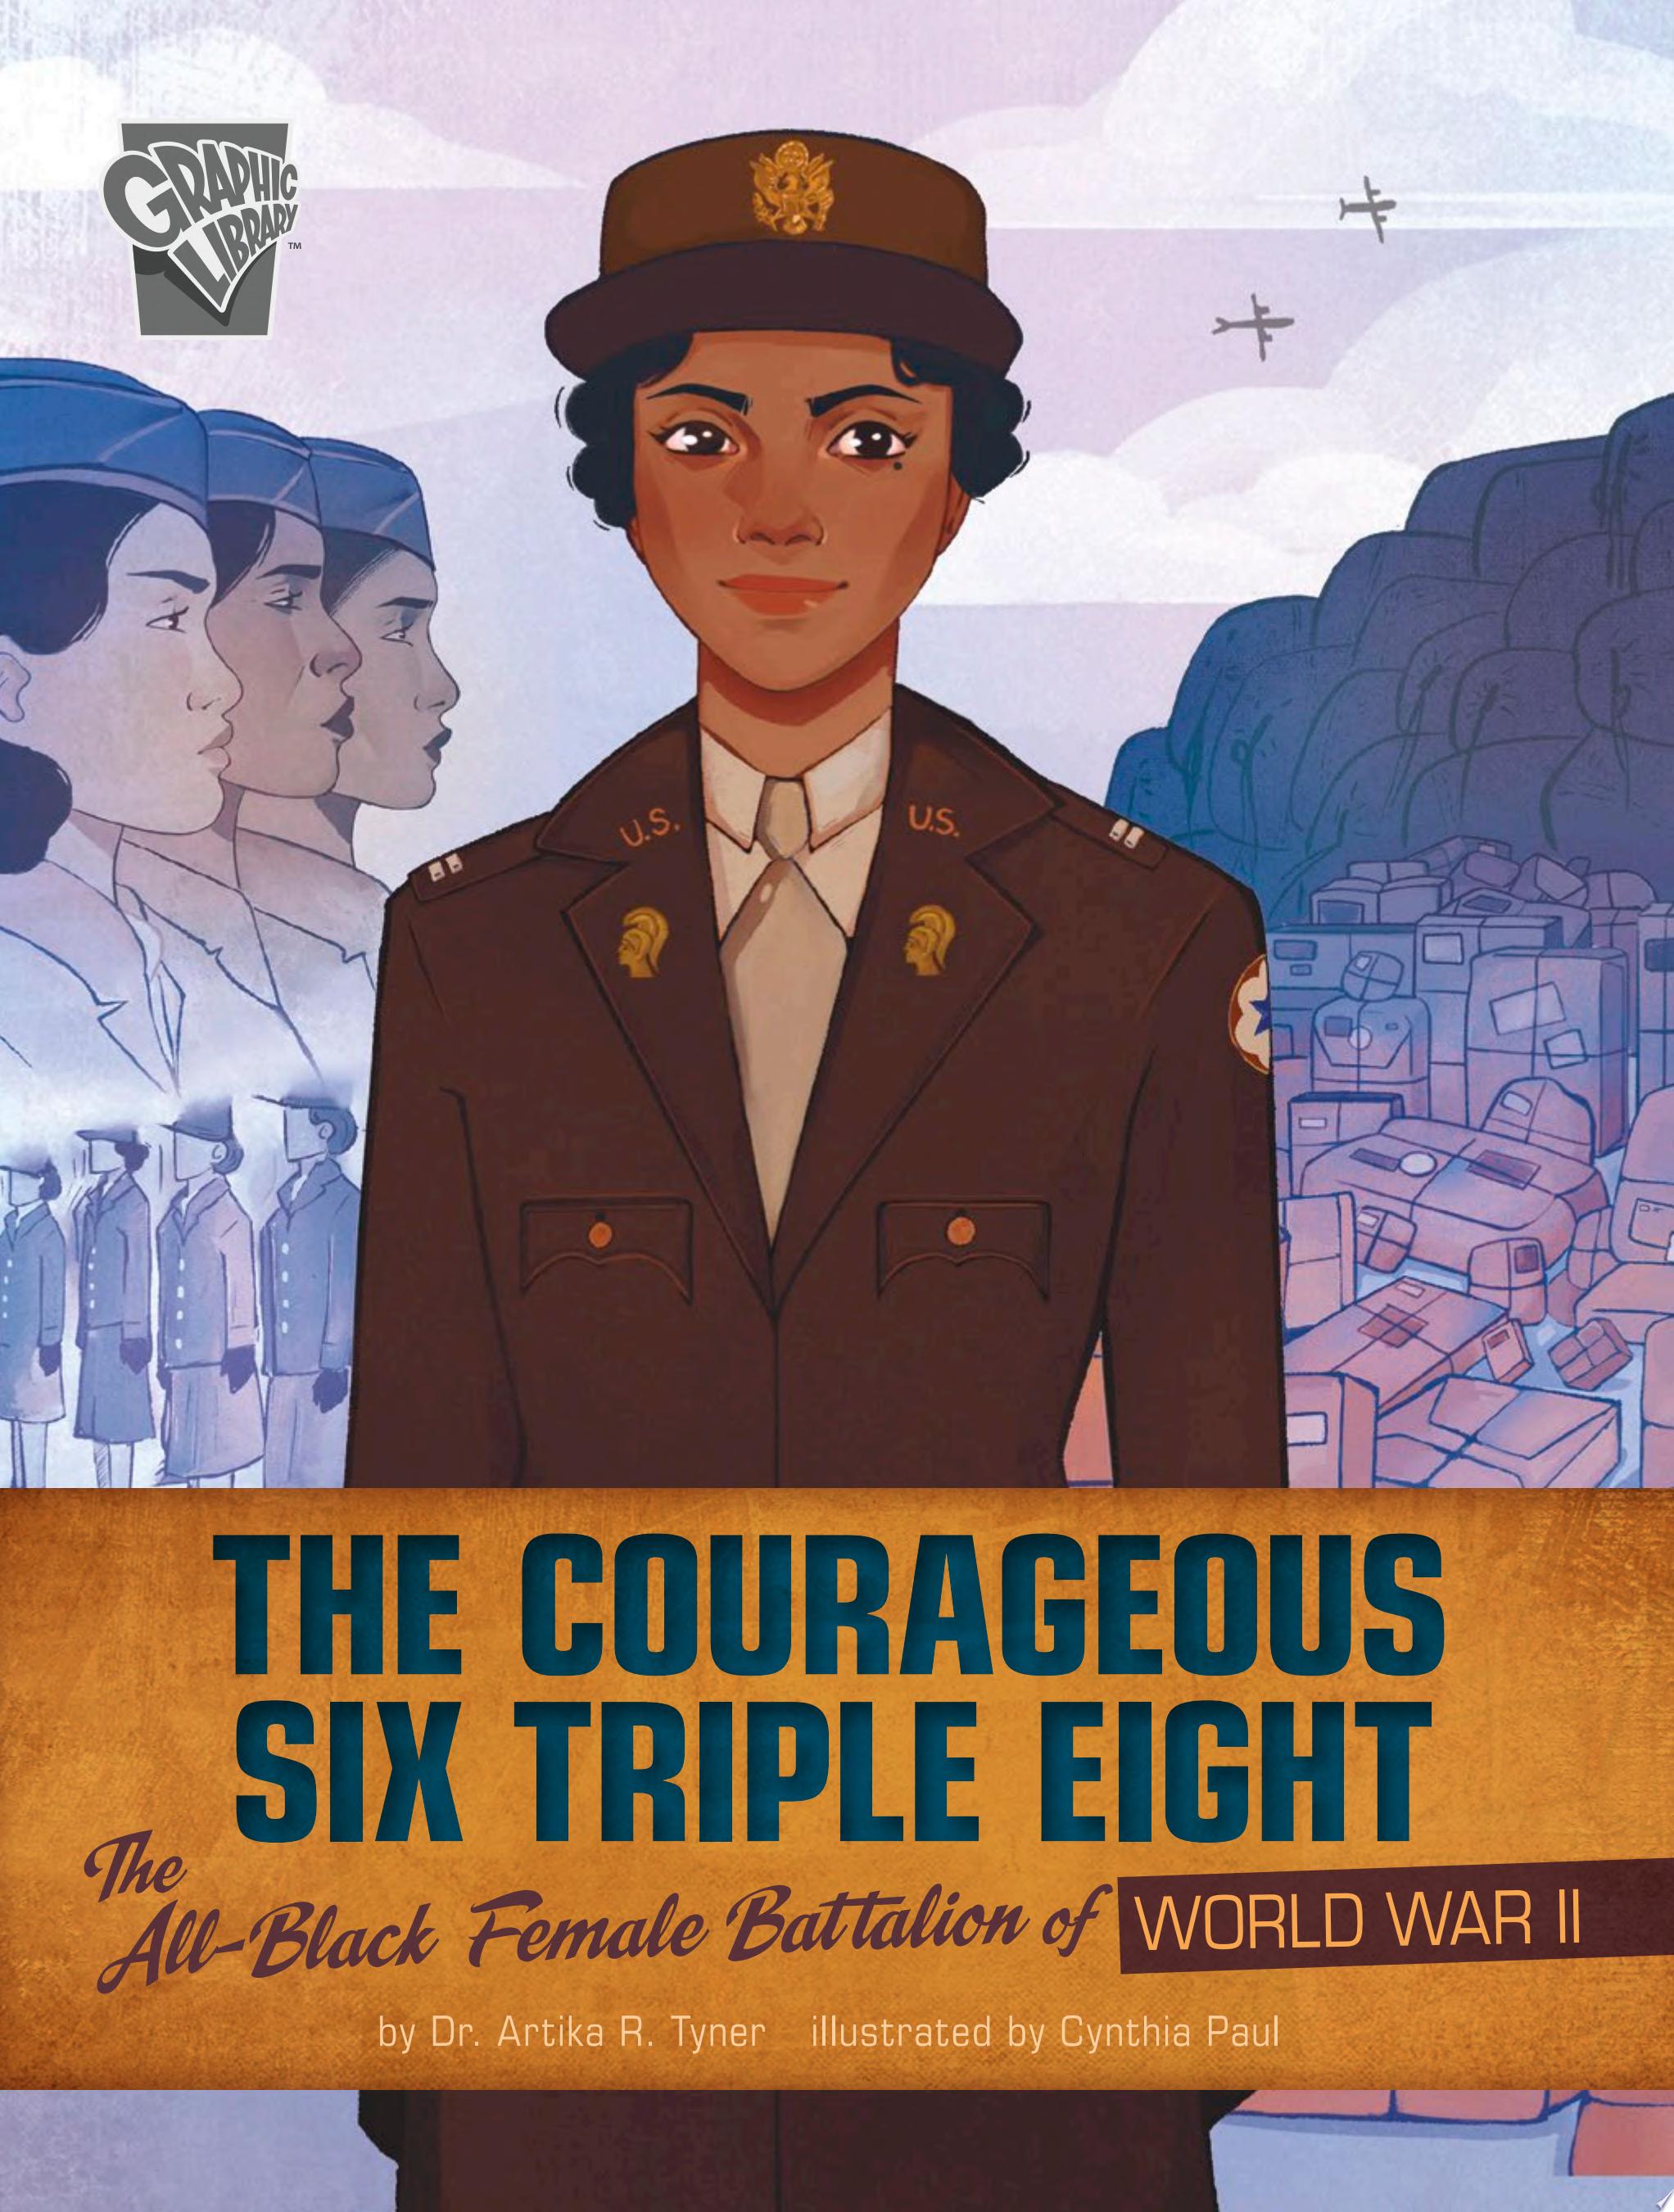 Image for "The Courageous Six Triple Eight"